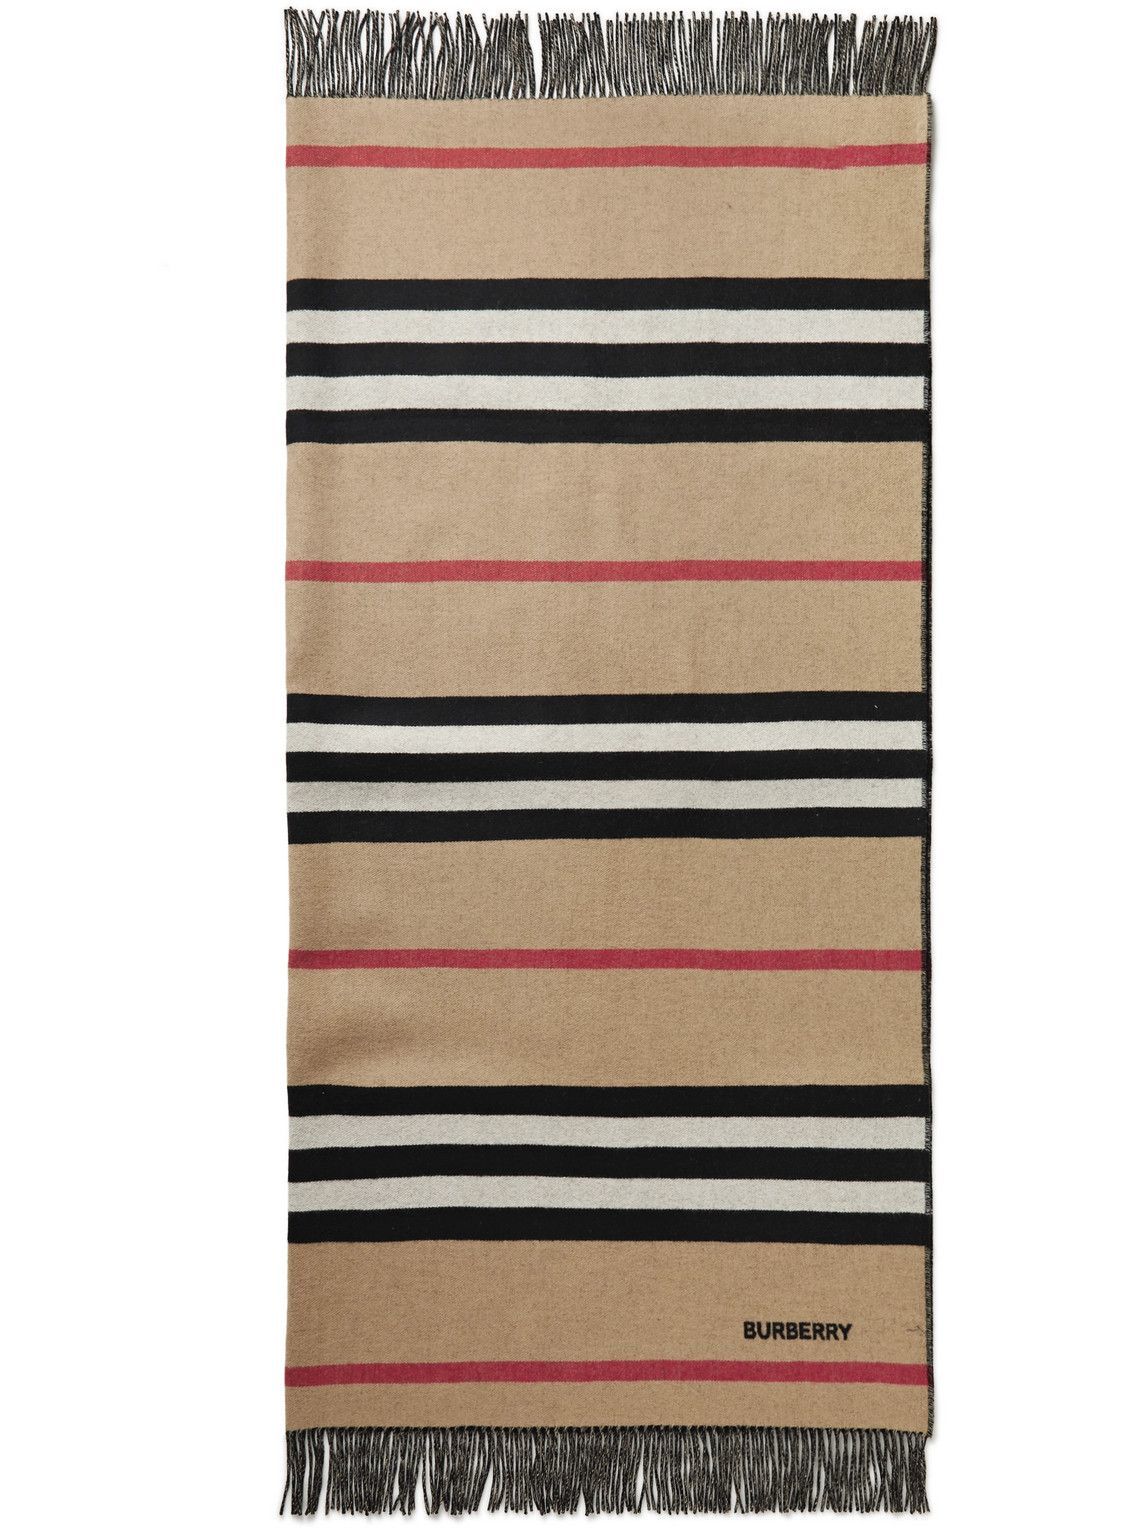 Photo: Burberry - Fringed Striped Cashmere Blanket